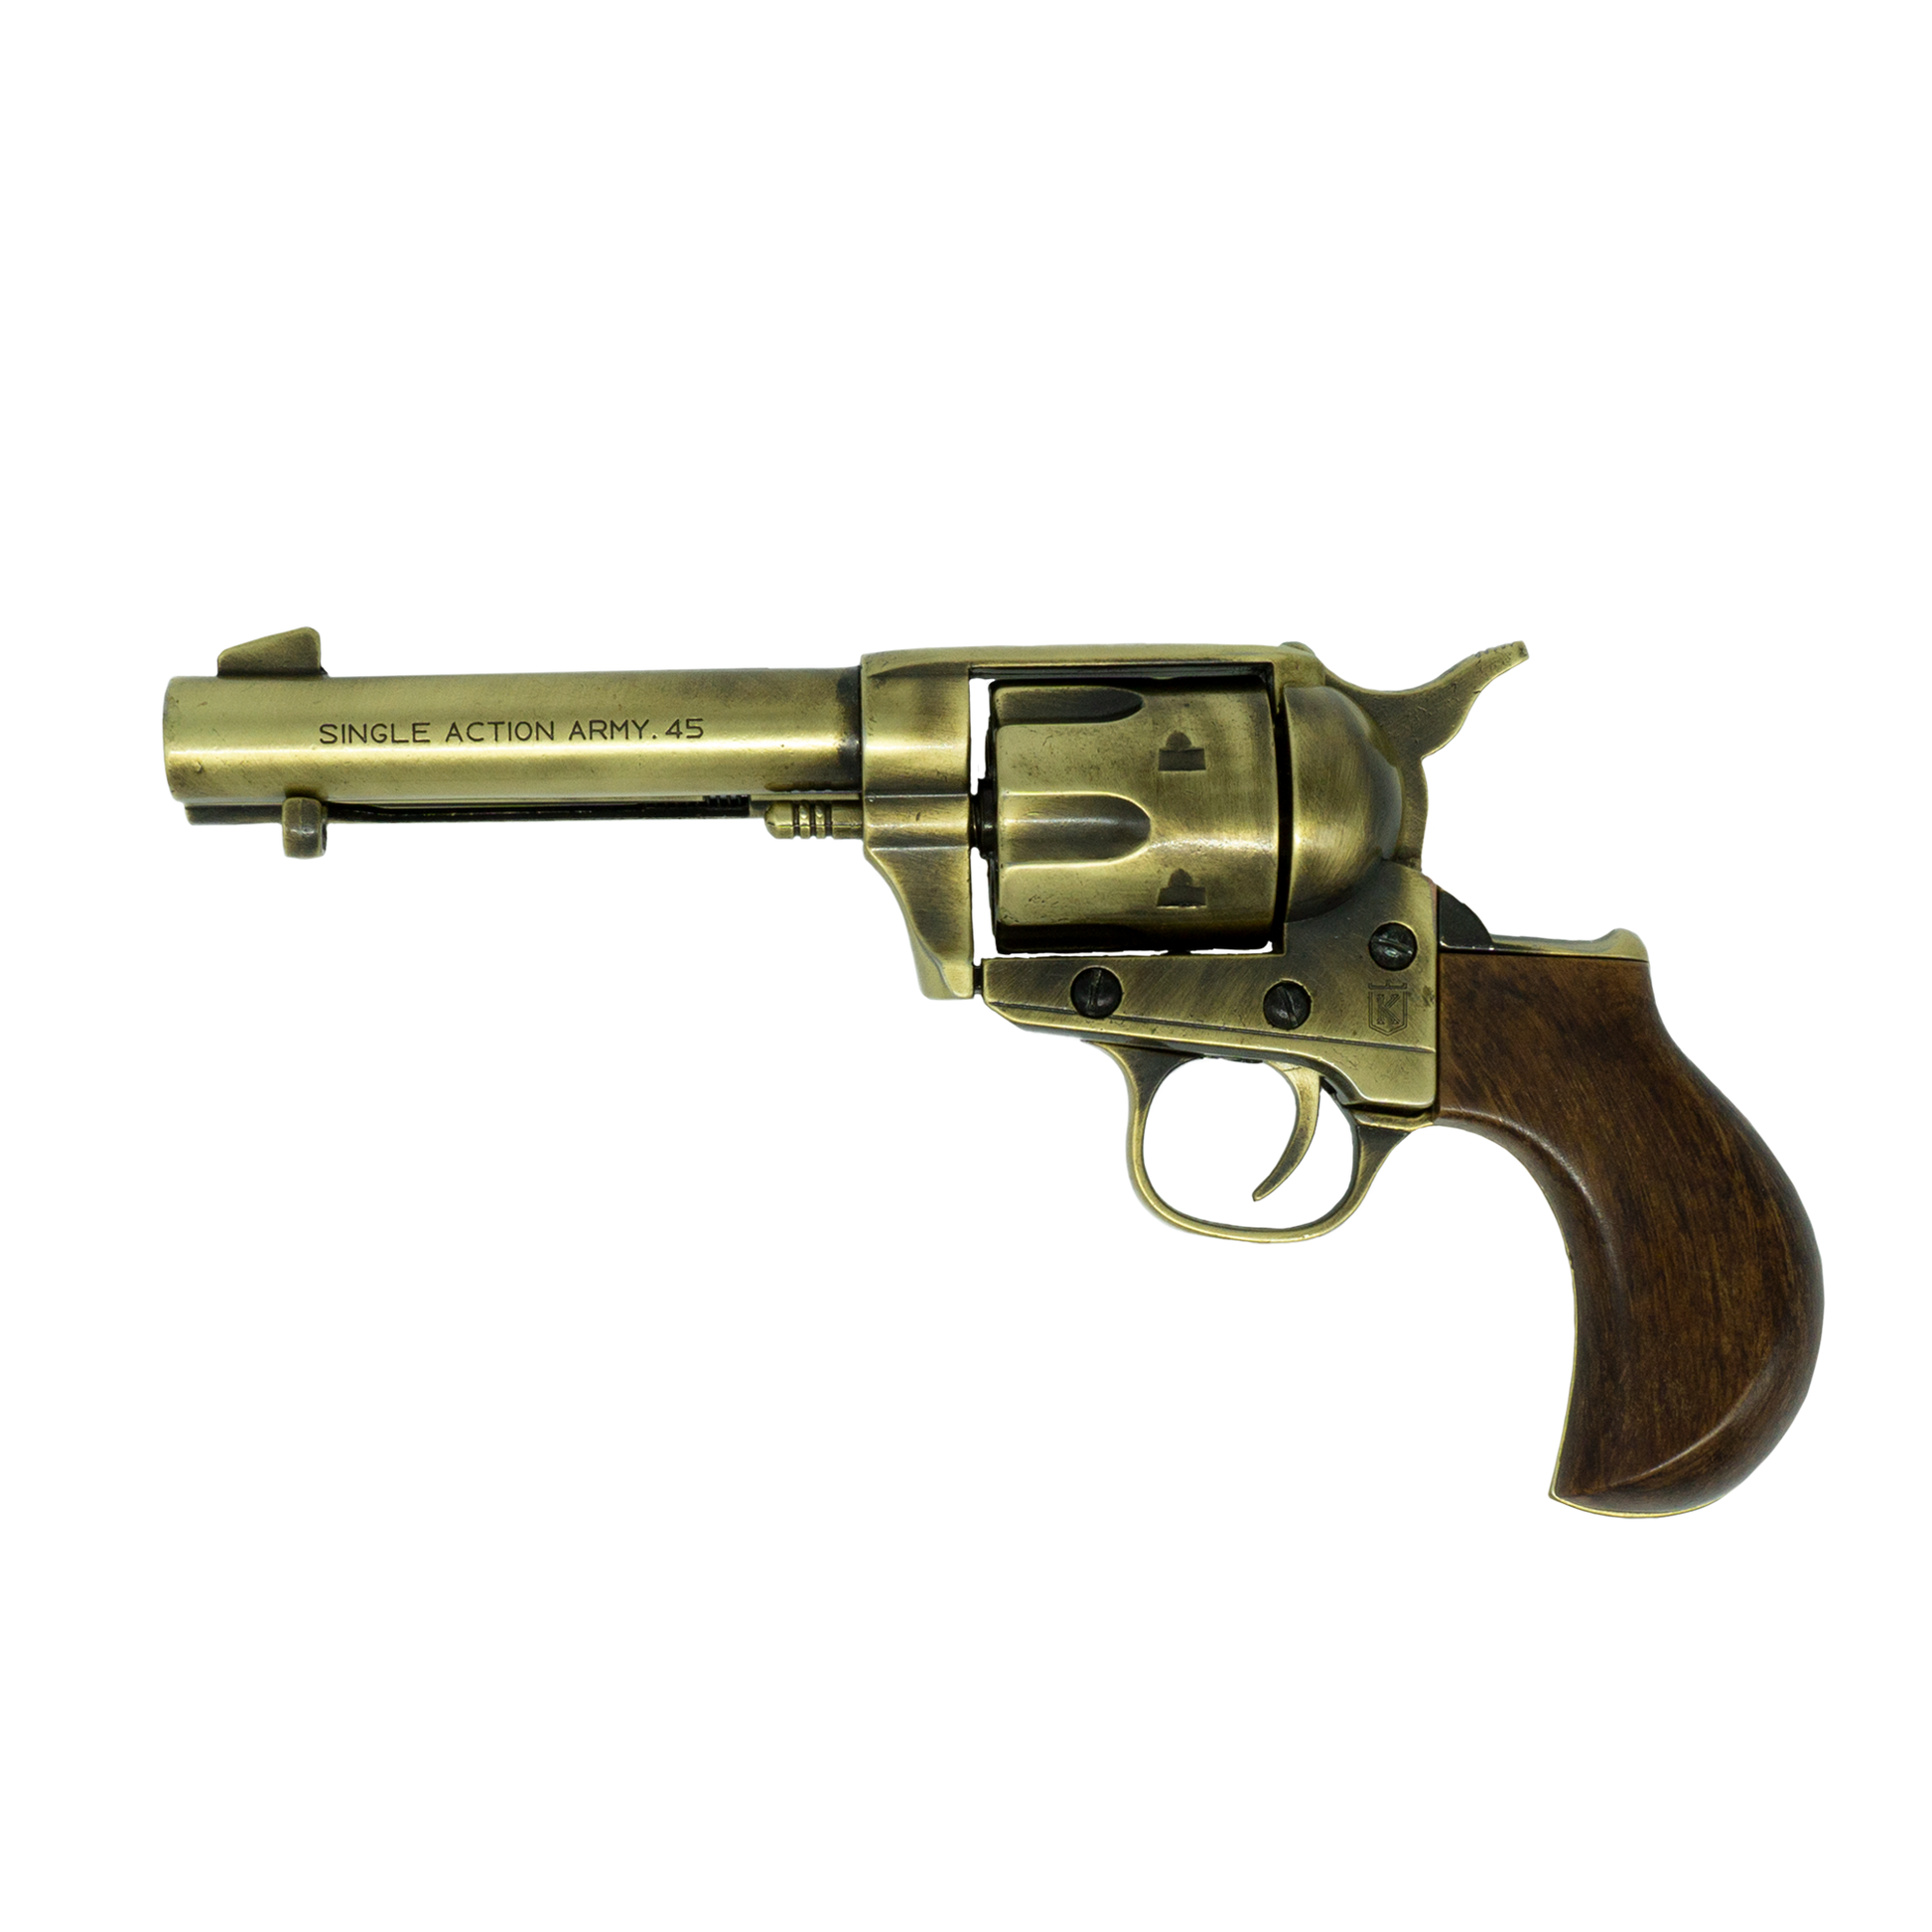 Left Hand view of brass Thunderer revolver with faux wood birdshead grip.